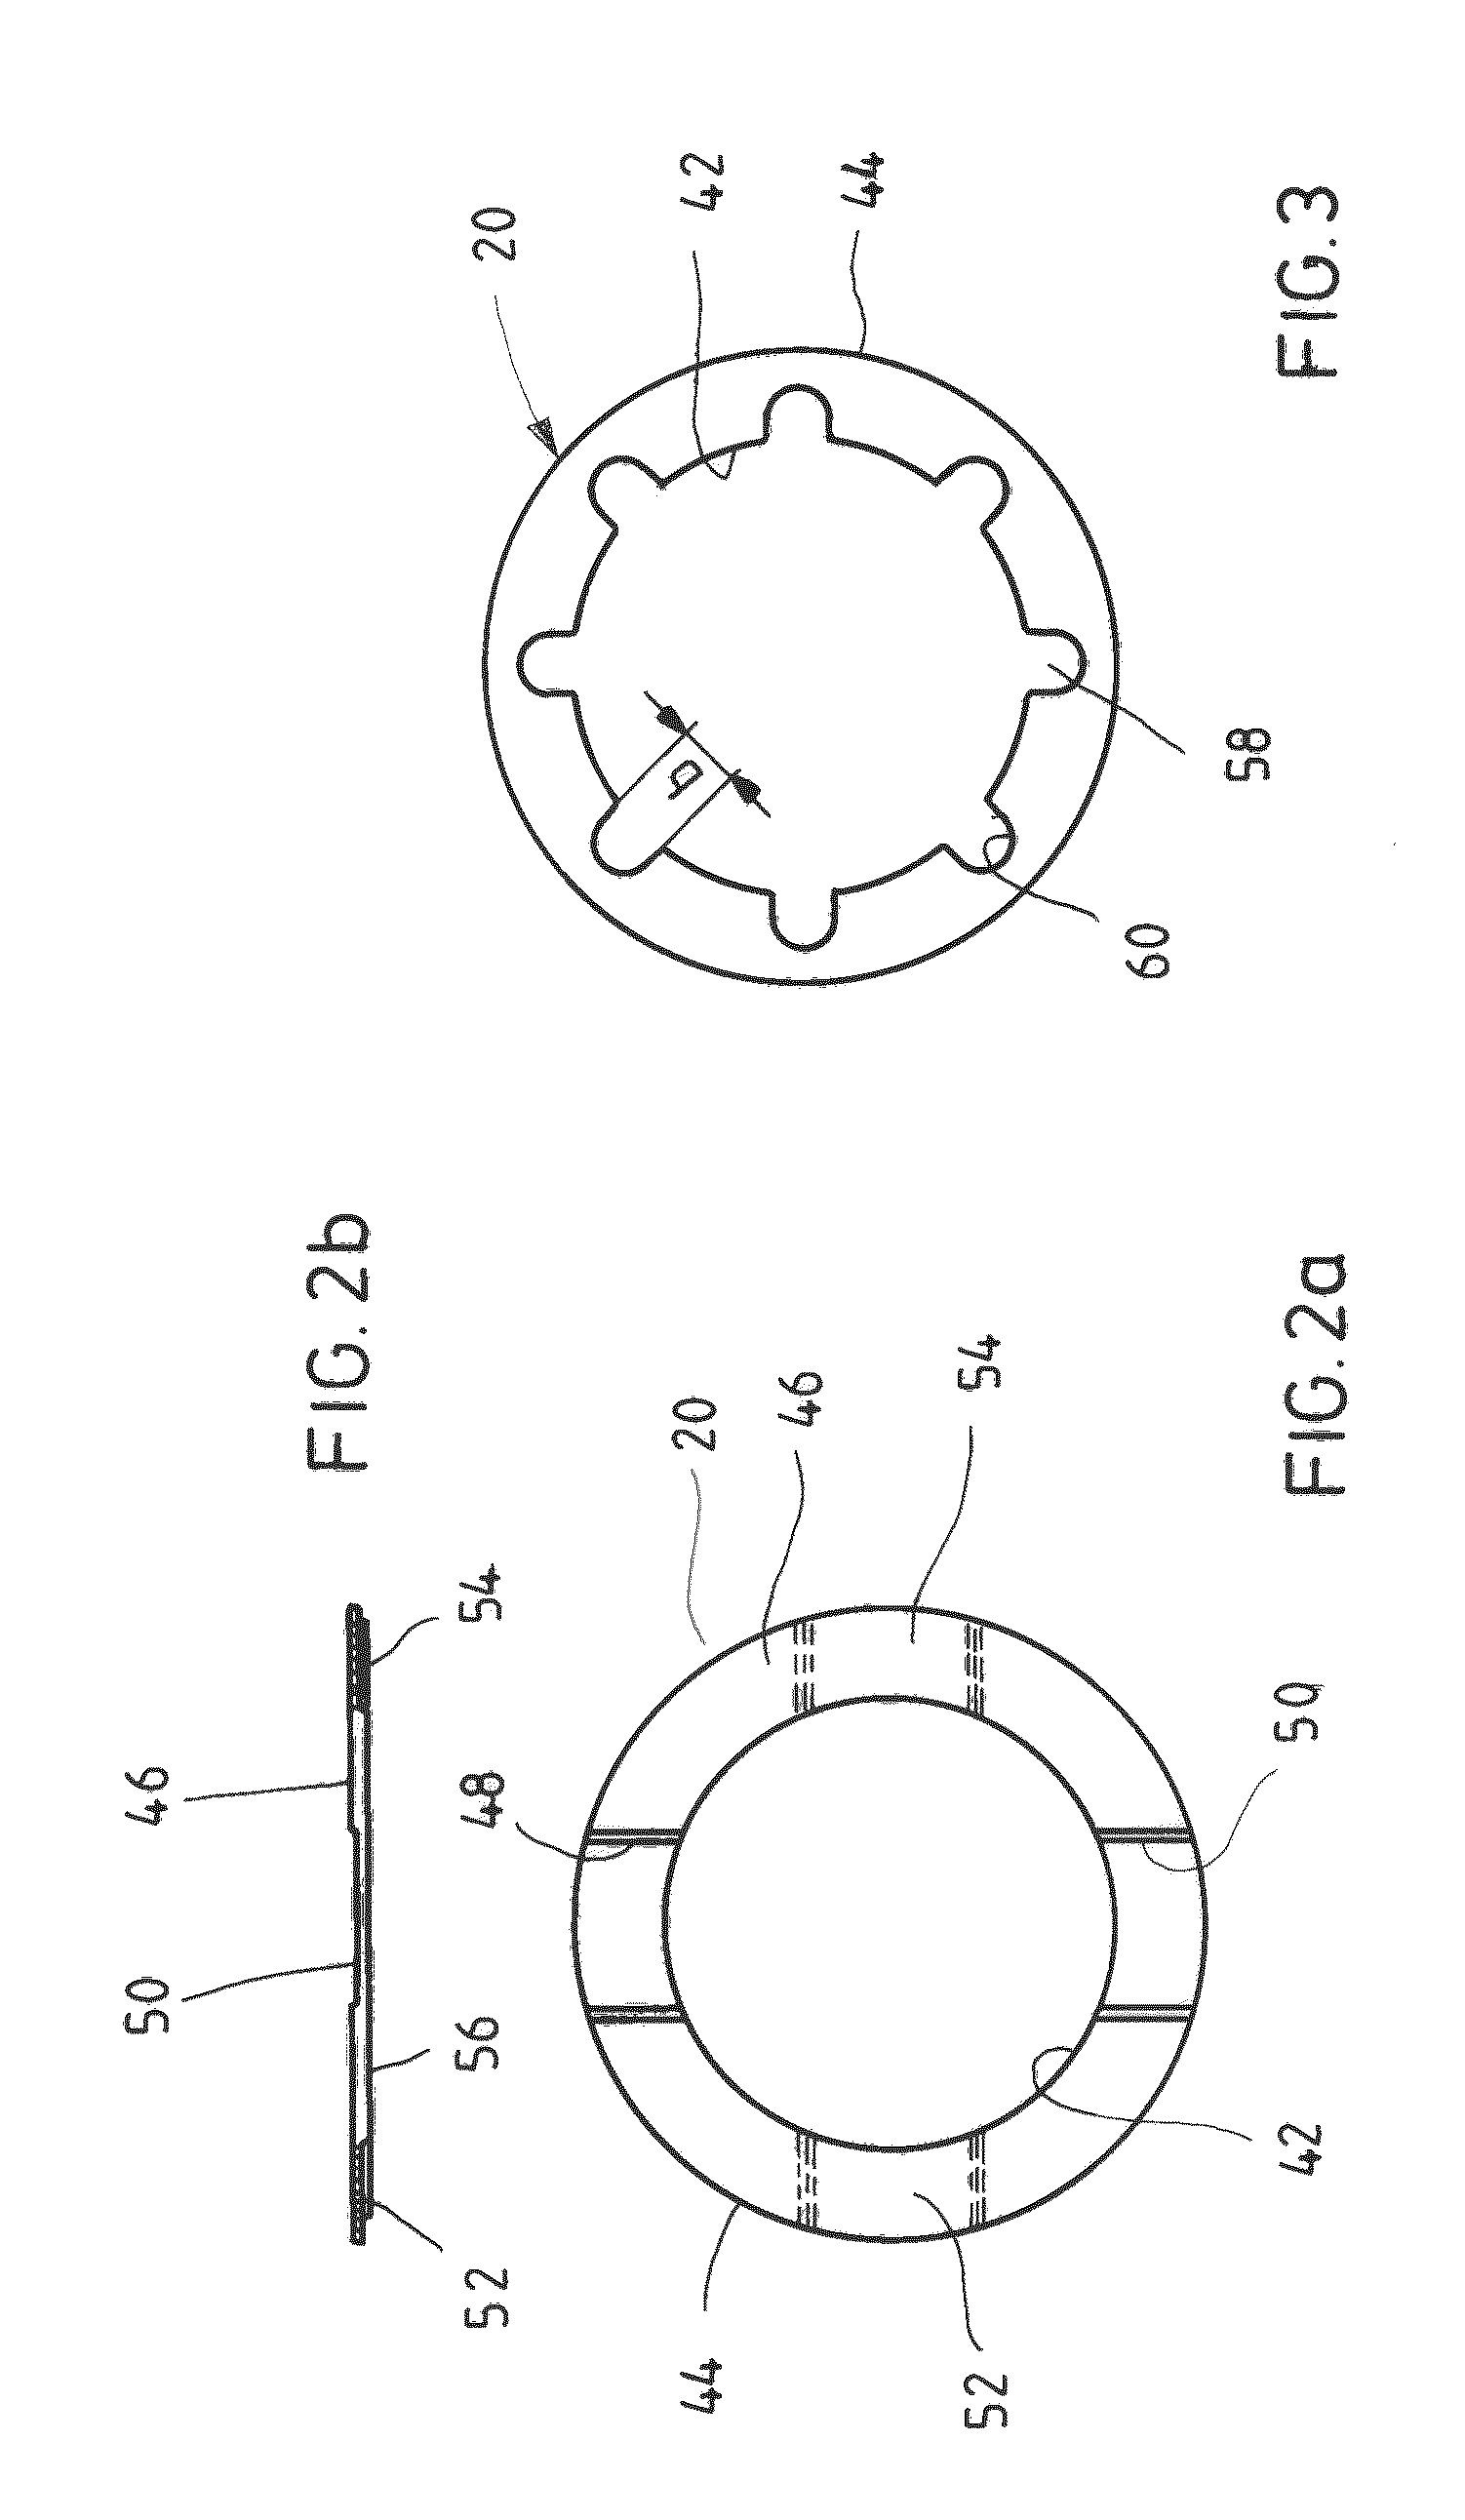 Actuating solenoid and non-stick disk